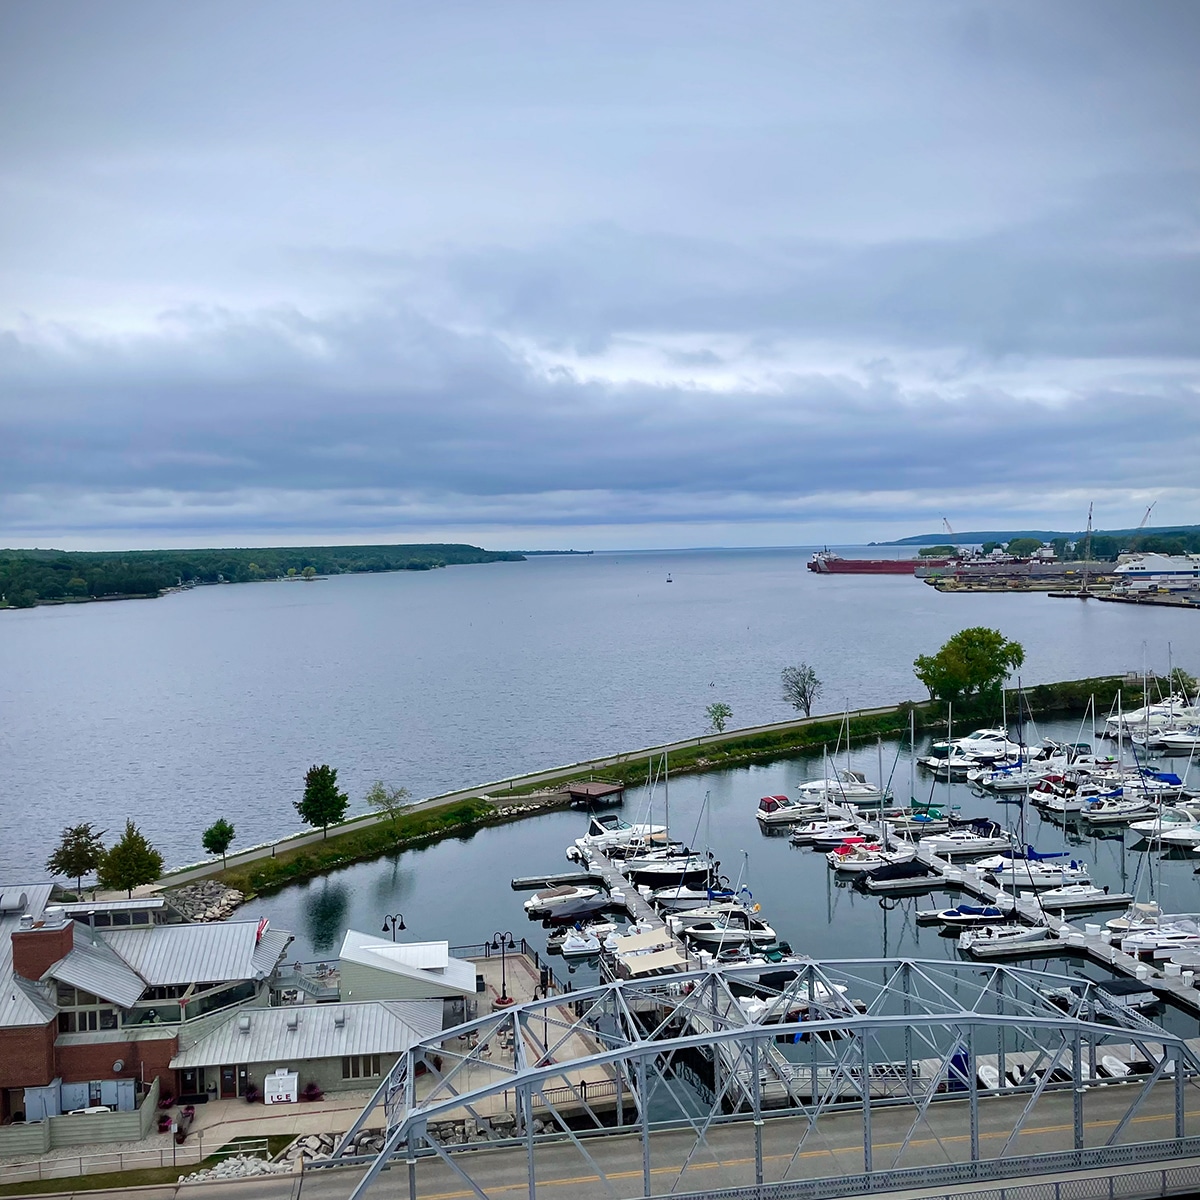 Looking out across the water from the top of the Door County Maritime Museum tower.